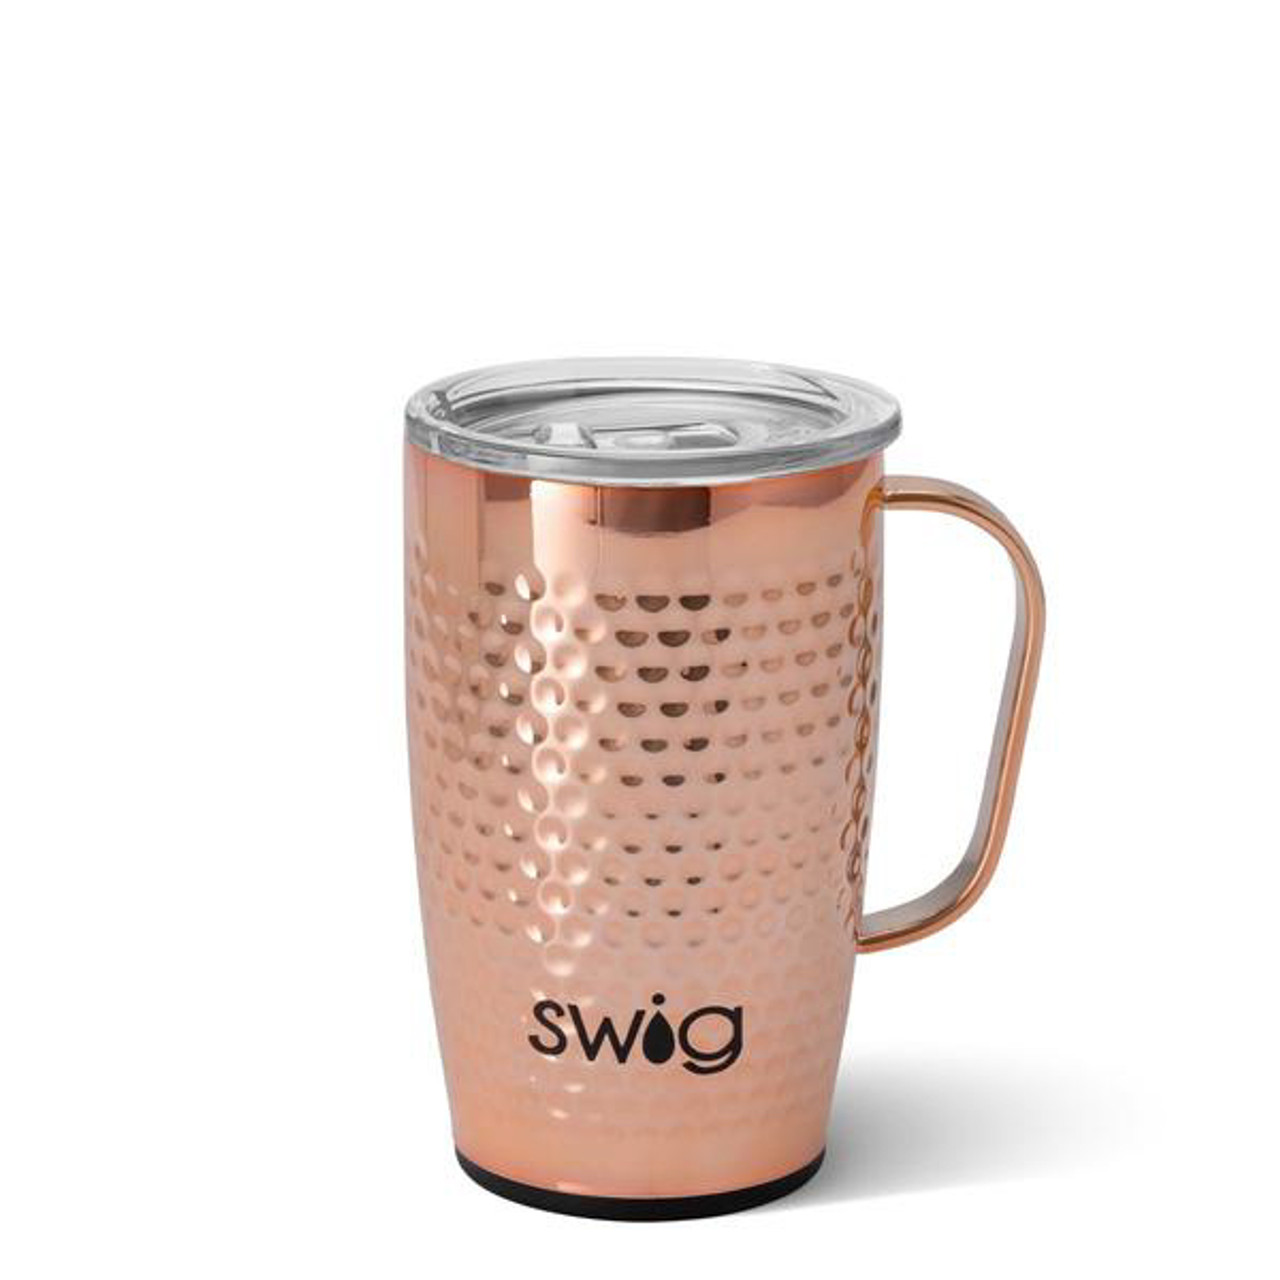 https://cdn11.bigcommerce.com/s-6zwhmb4rdr/images/stencil/1280x1280/products/72082/192687/the-lamp-stand-swig-cocktail-club-18-oz-hot-toddy-mug-s108-c18-cp-1__78841.1636726116.jpg?c=1